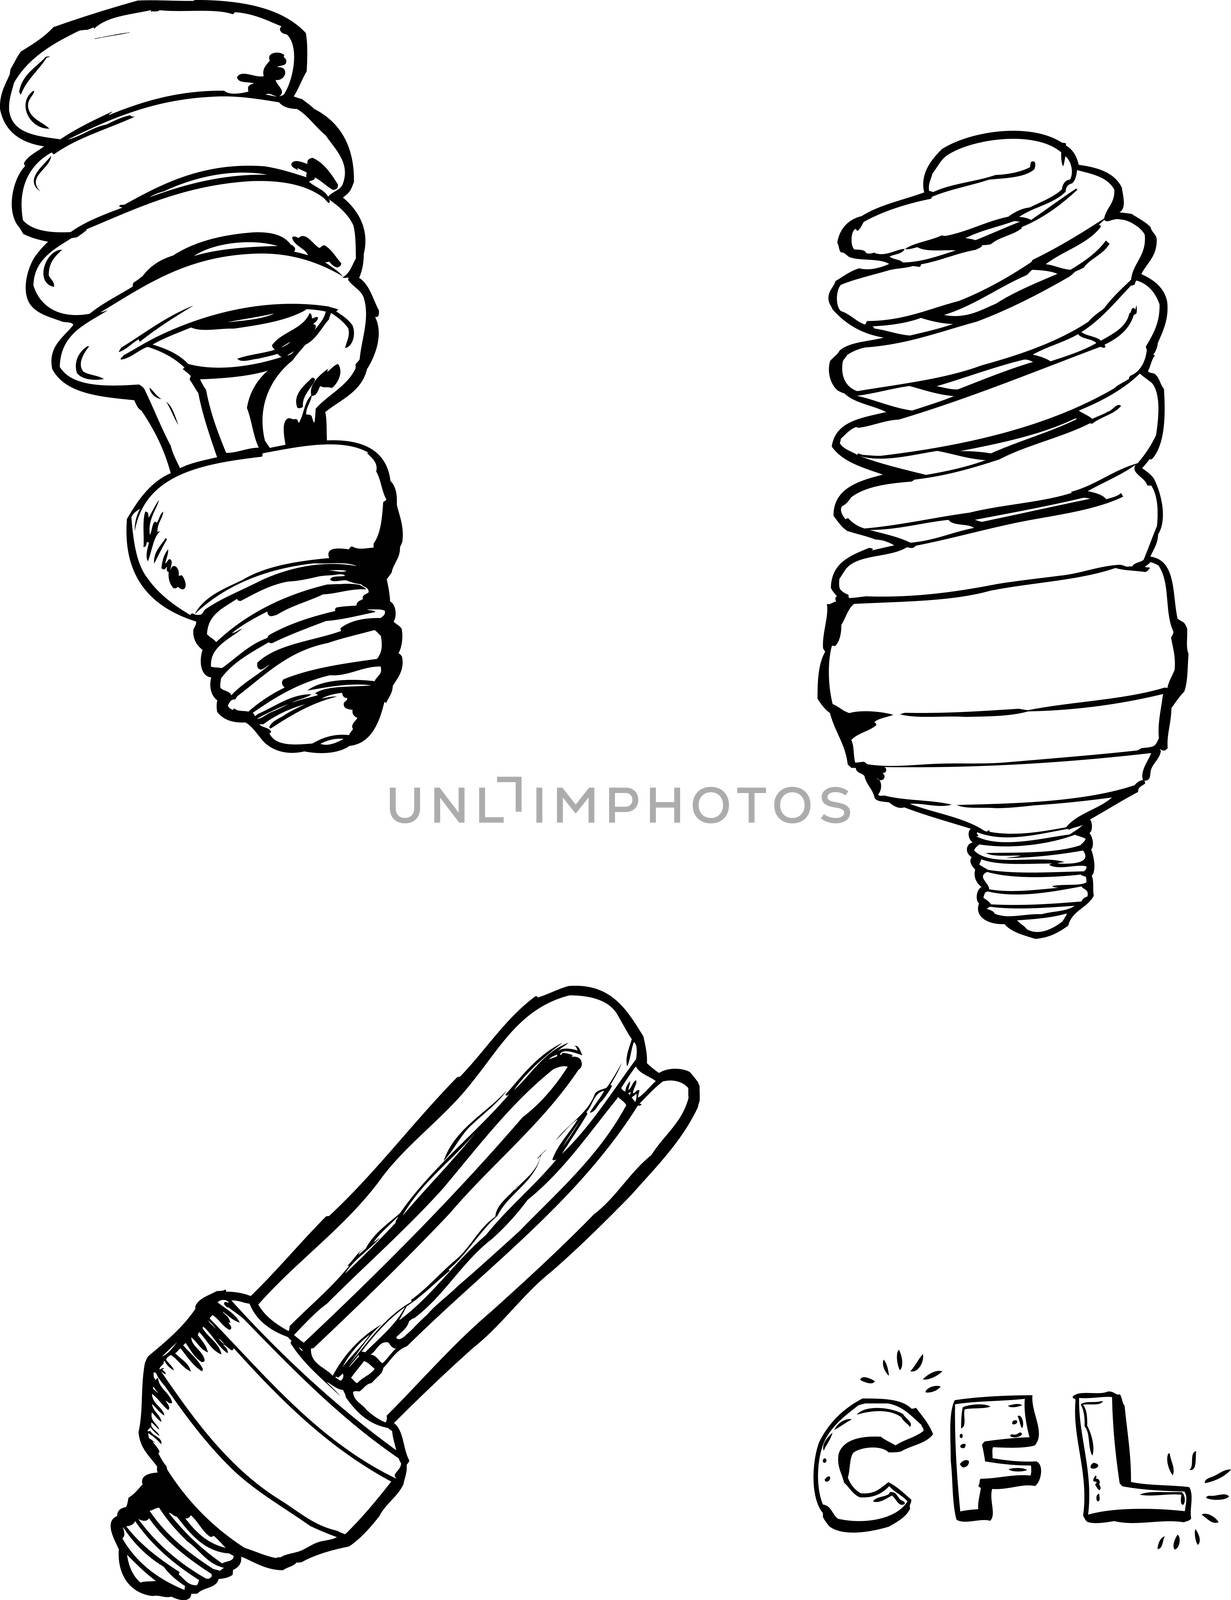 Outlined Compact Fluorescent Light Bulbs by TheBlackRhino